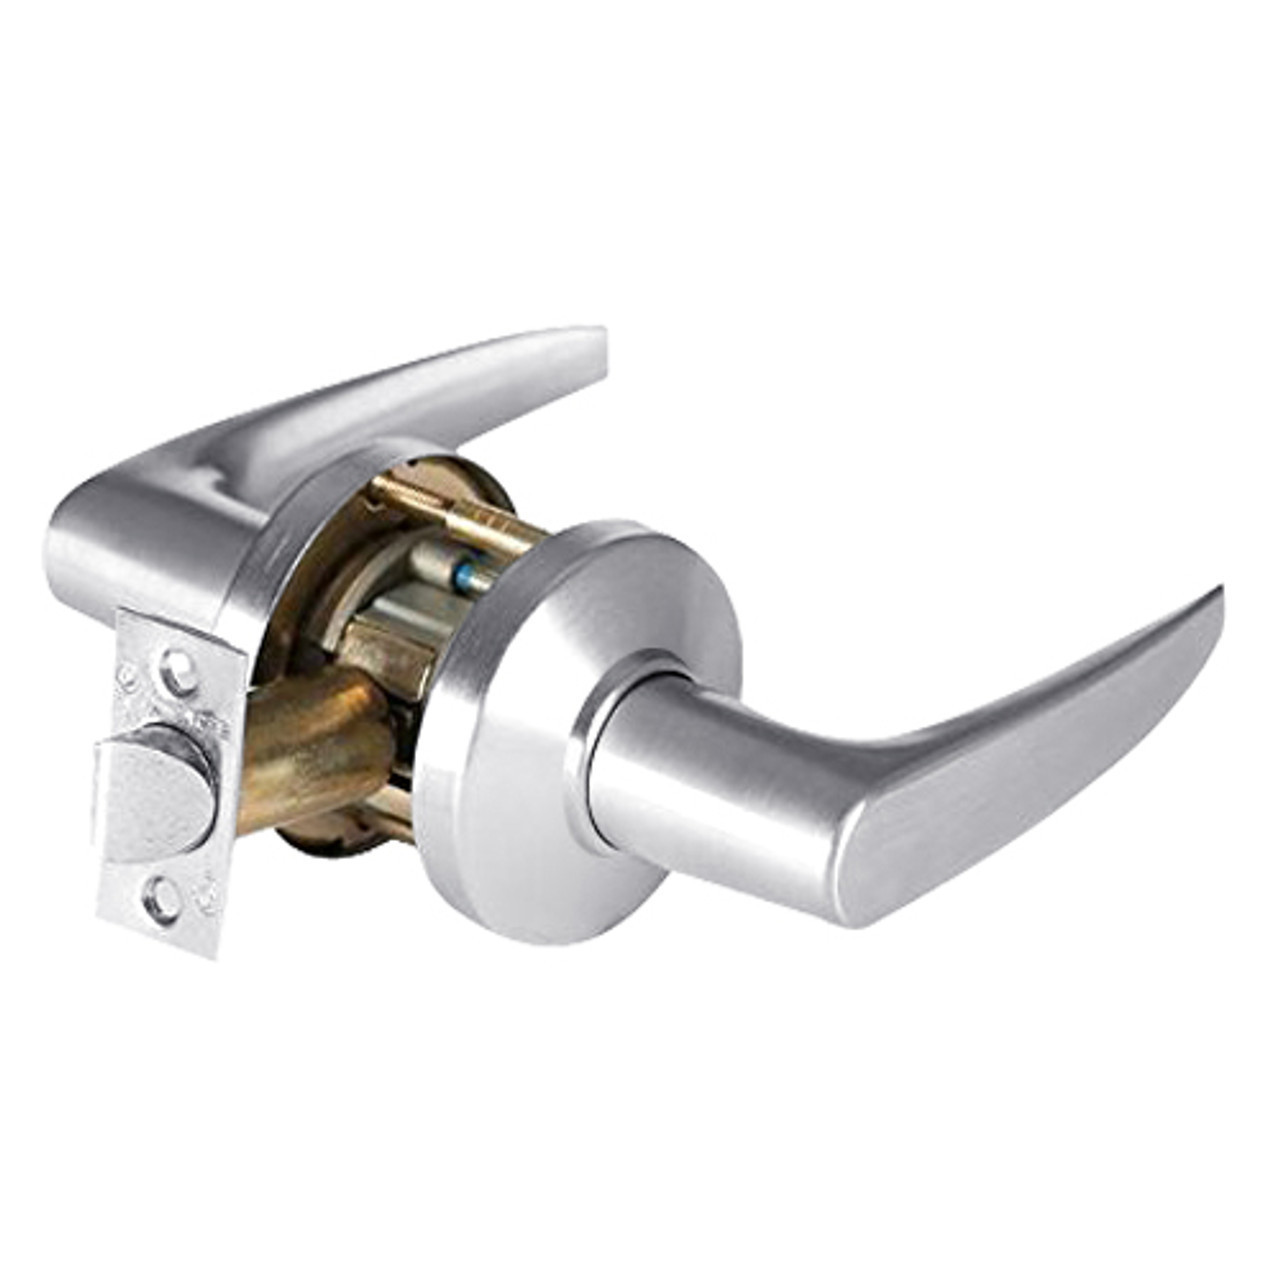 9K50N16CSTK625LM Best 9K Series Passage Heavy Duty Cylindrical Lever Locks with Curved Without Return Lever Design in Bright Chrome